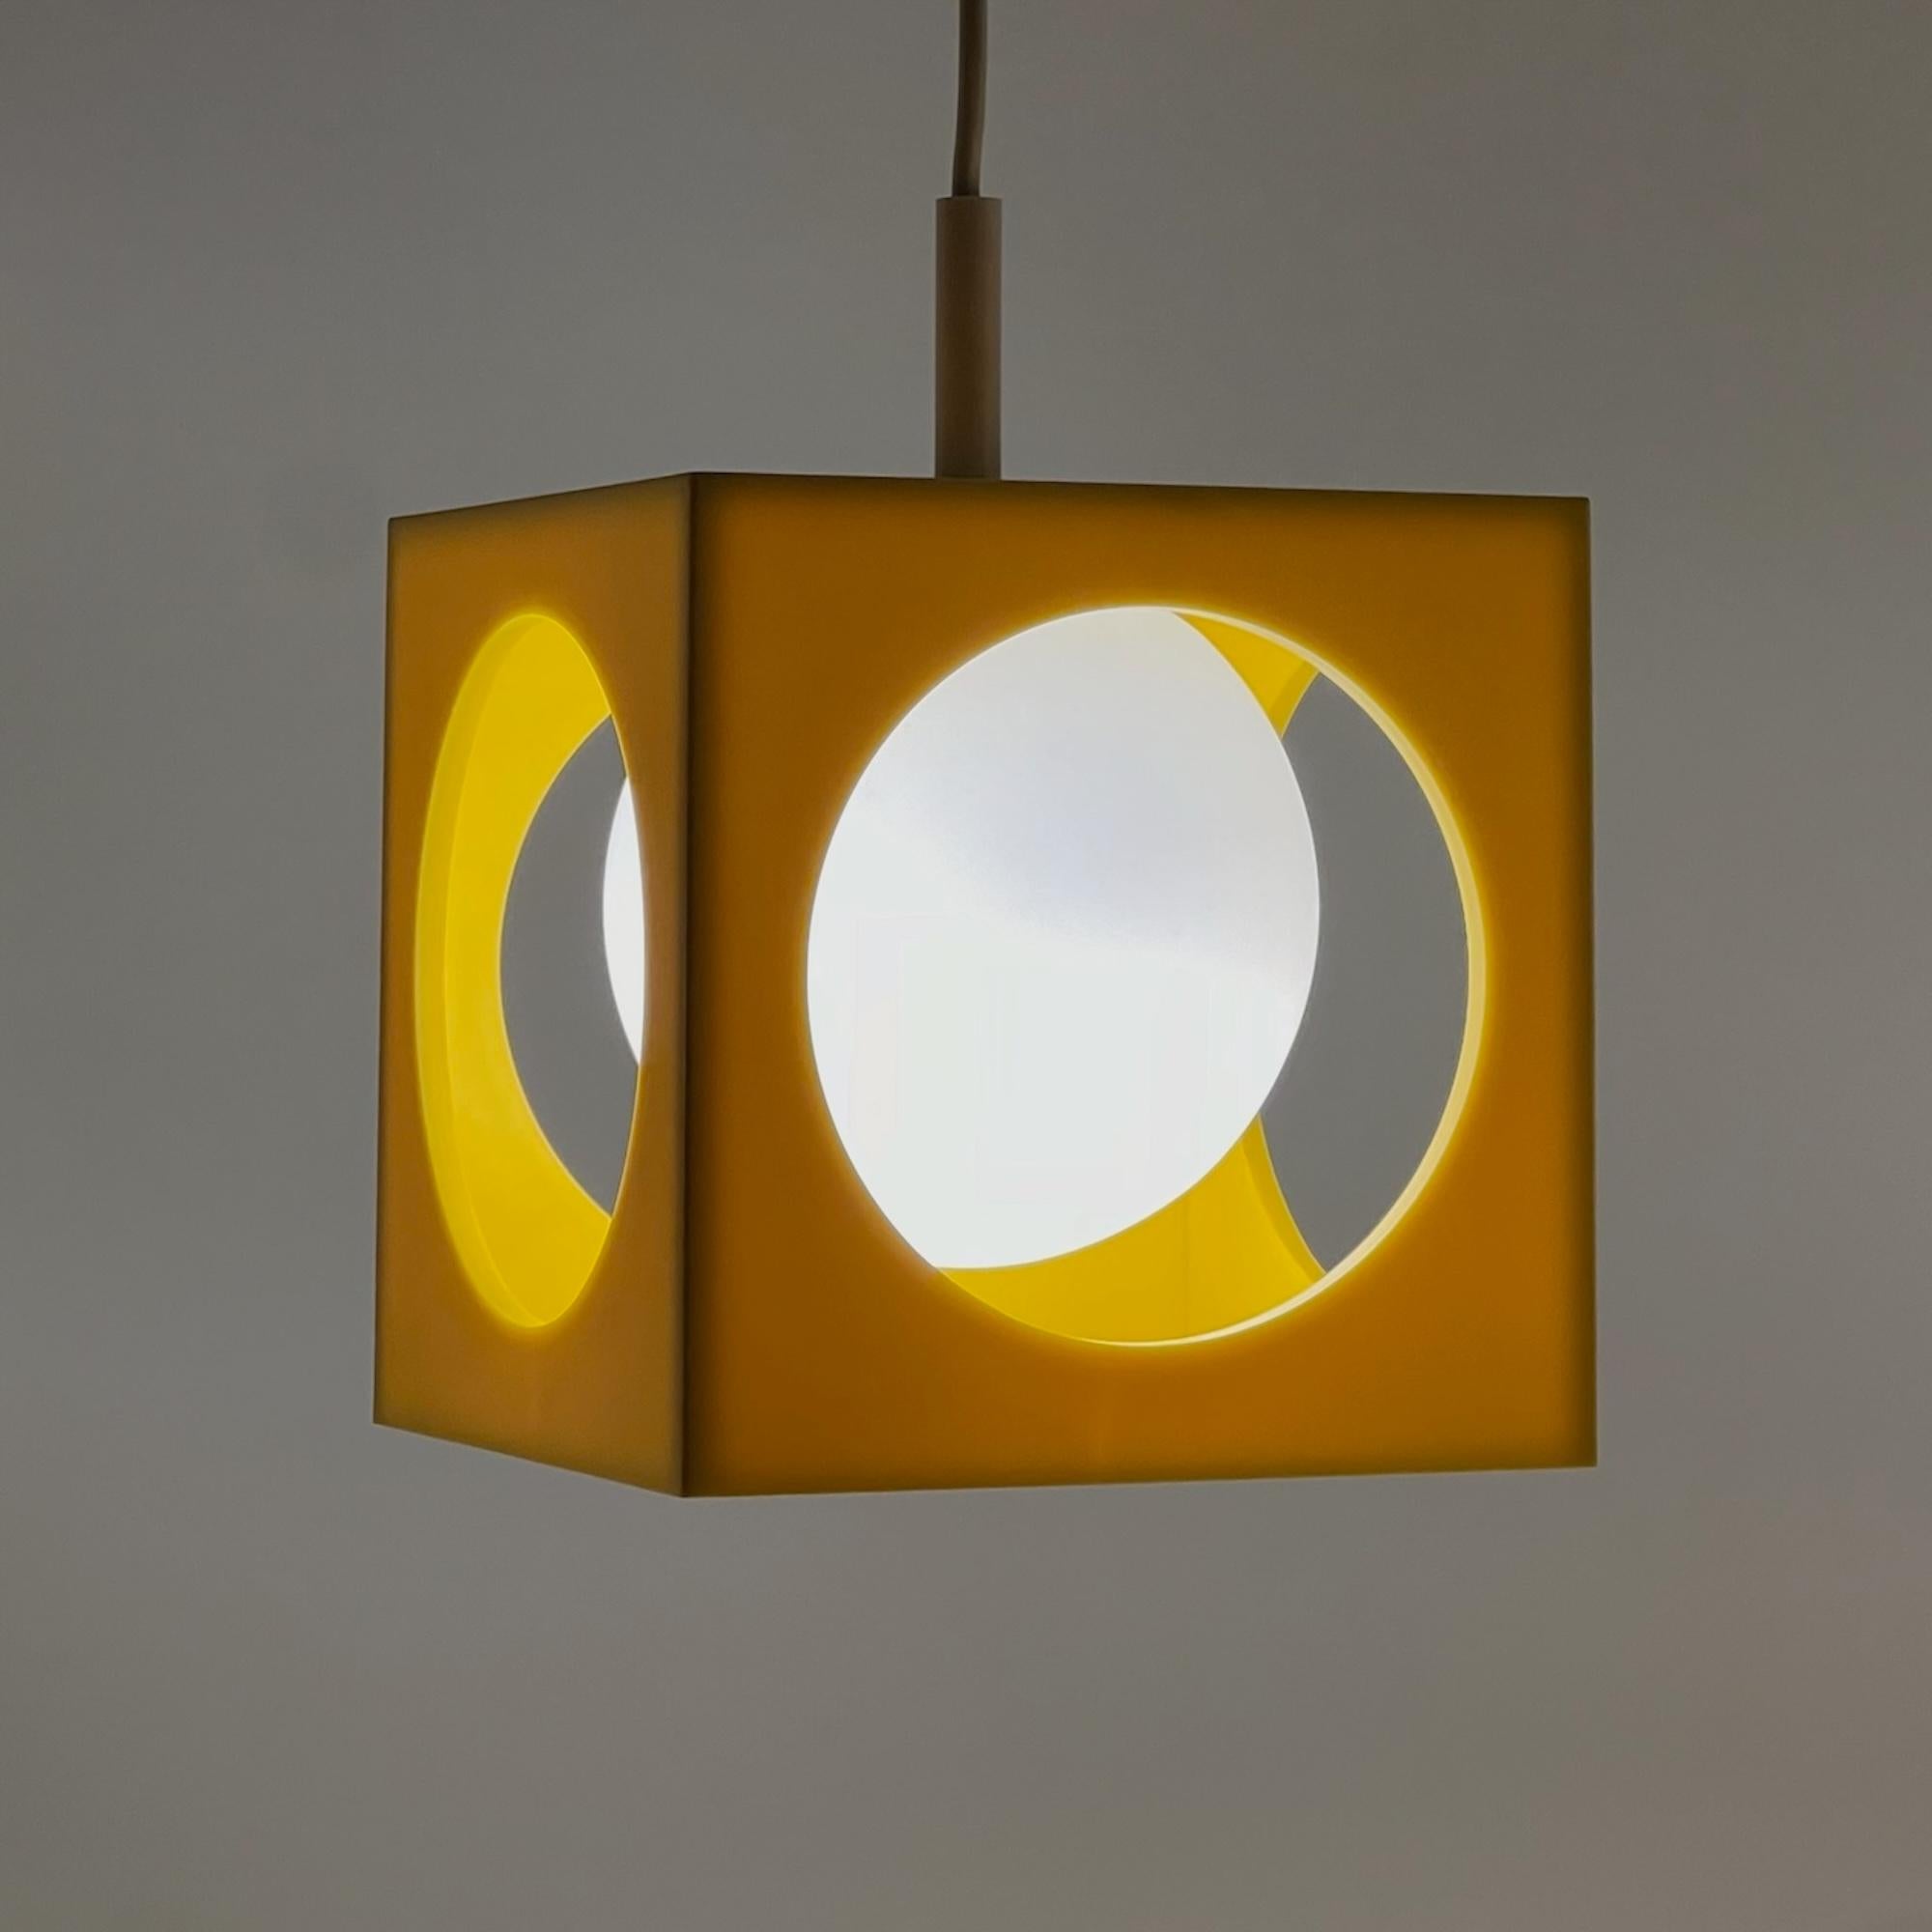 Late 20th Century Iconic Space Age Lamp by Richard Essig - Avantgarde Design from the 1970s For Sale